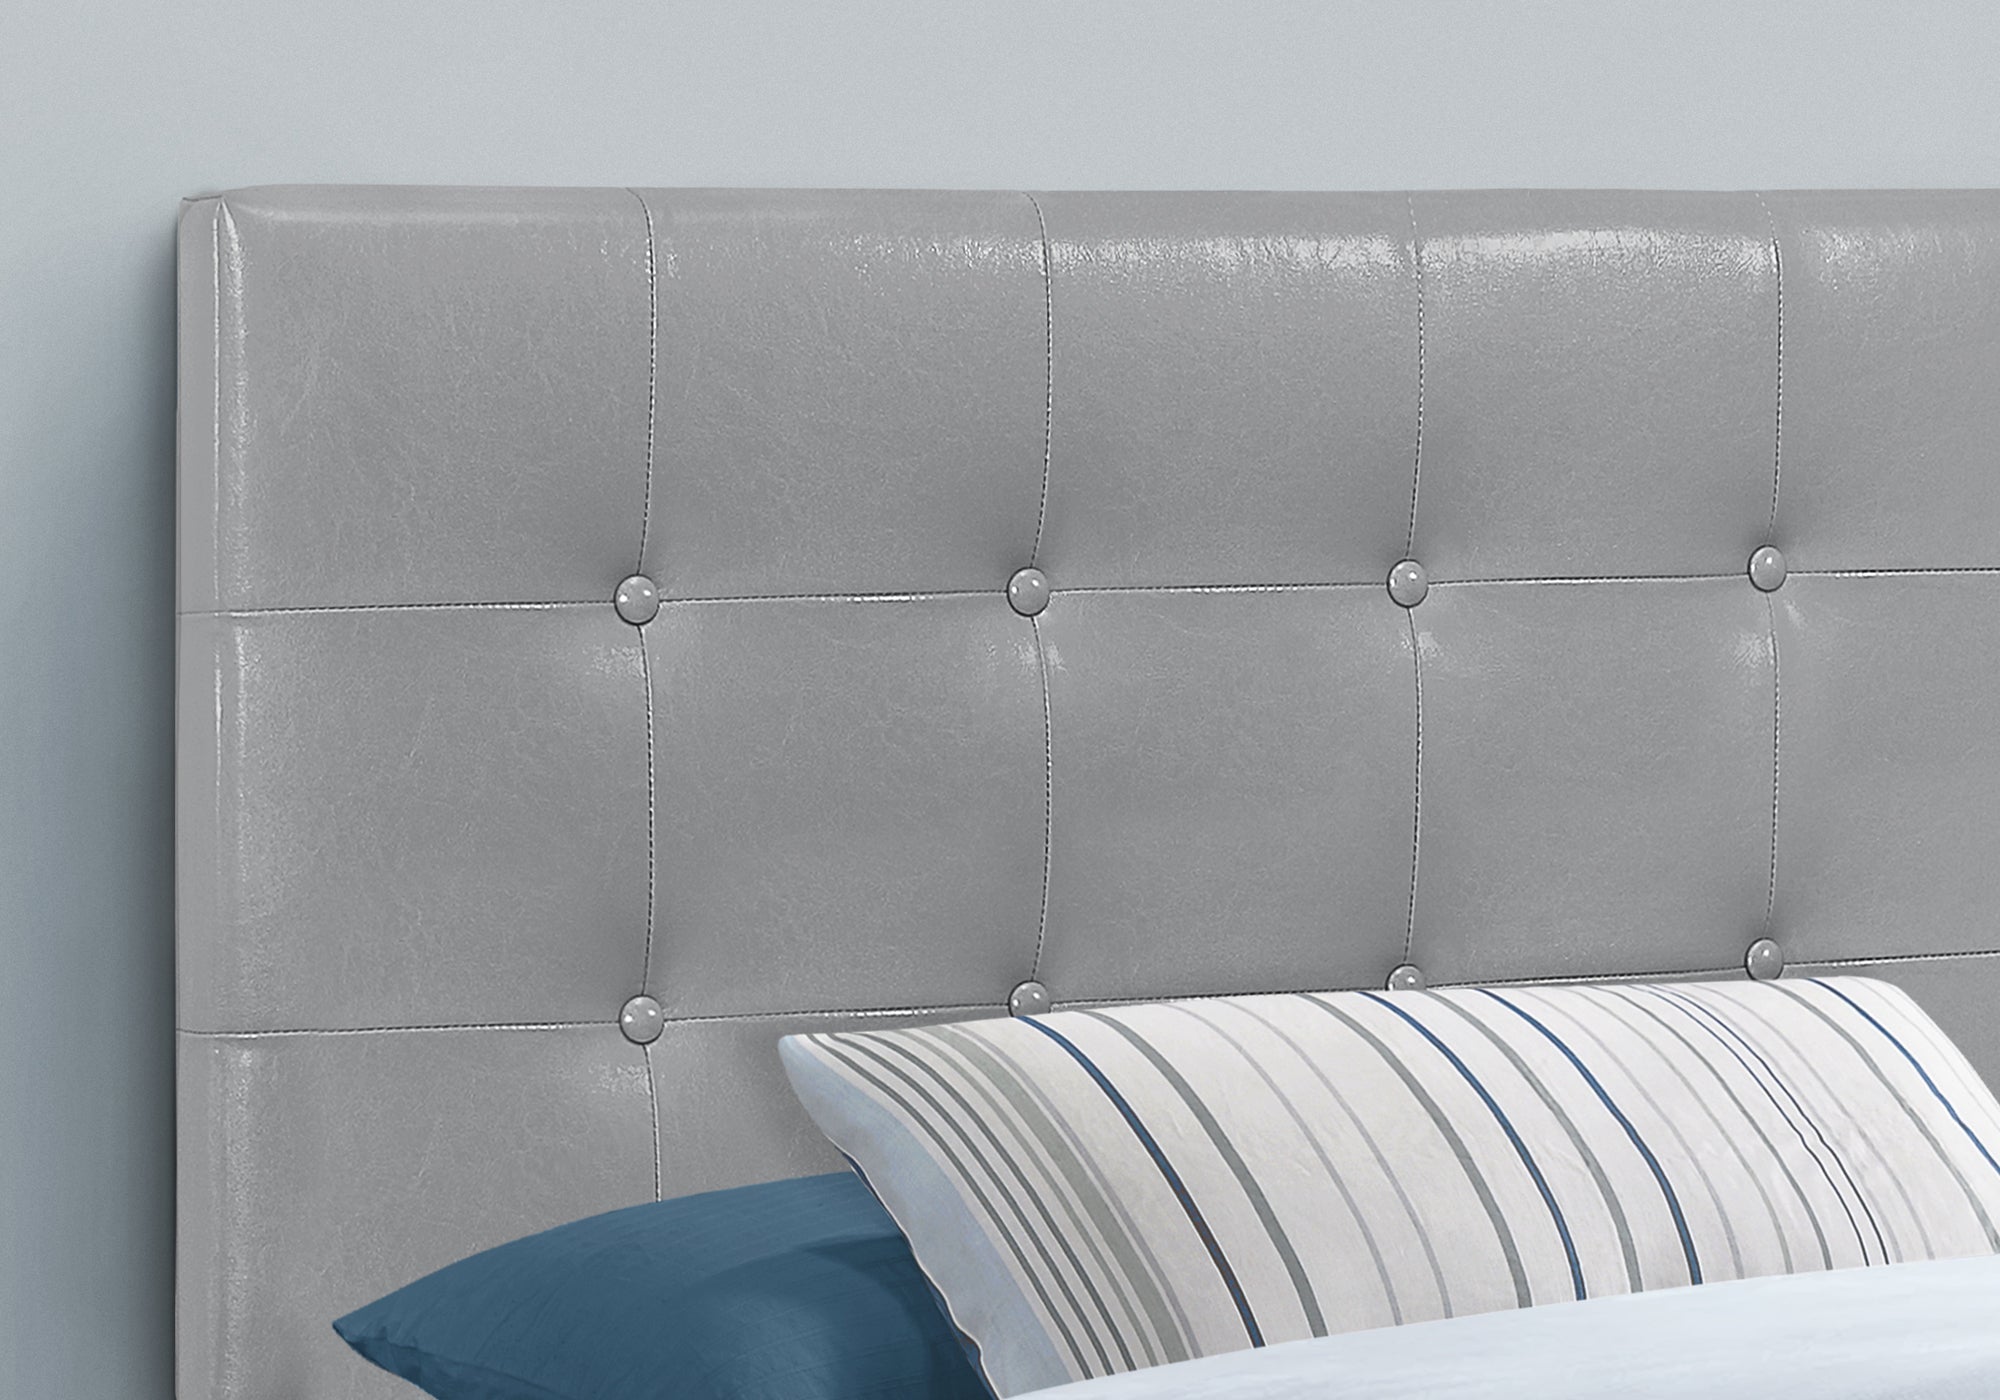 Bed - Twin Size / Grey Leather-Look Headboard Only